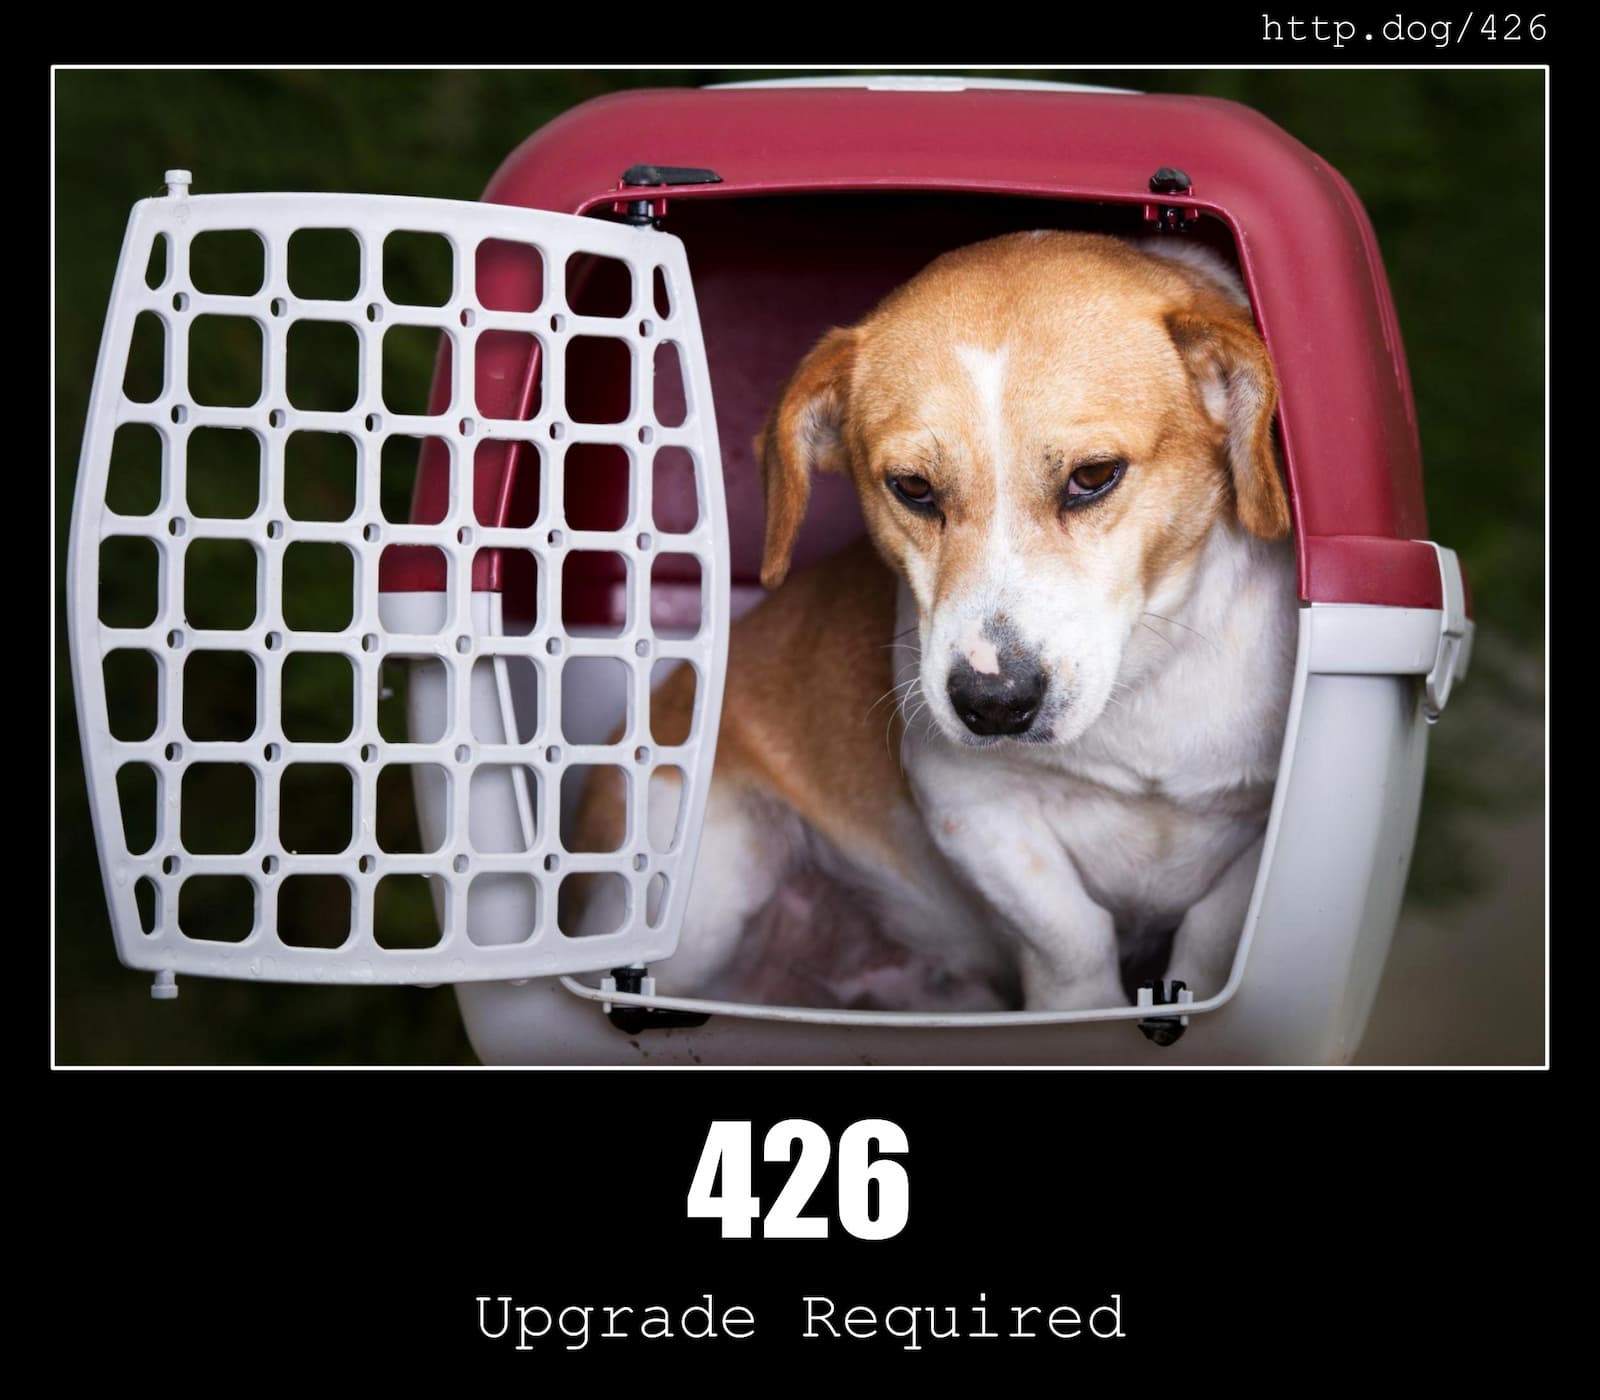 HTTP Status Code 426 Upgrade Required & Dogs